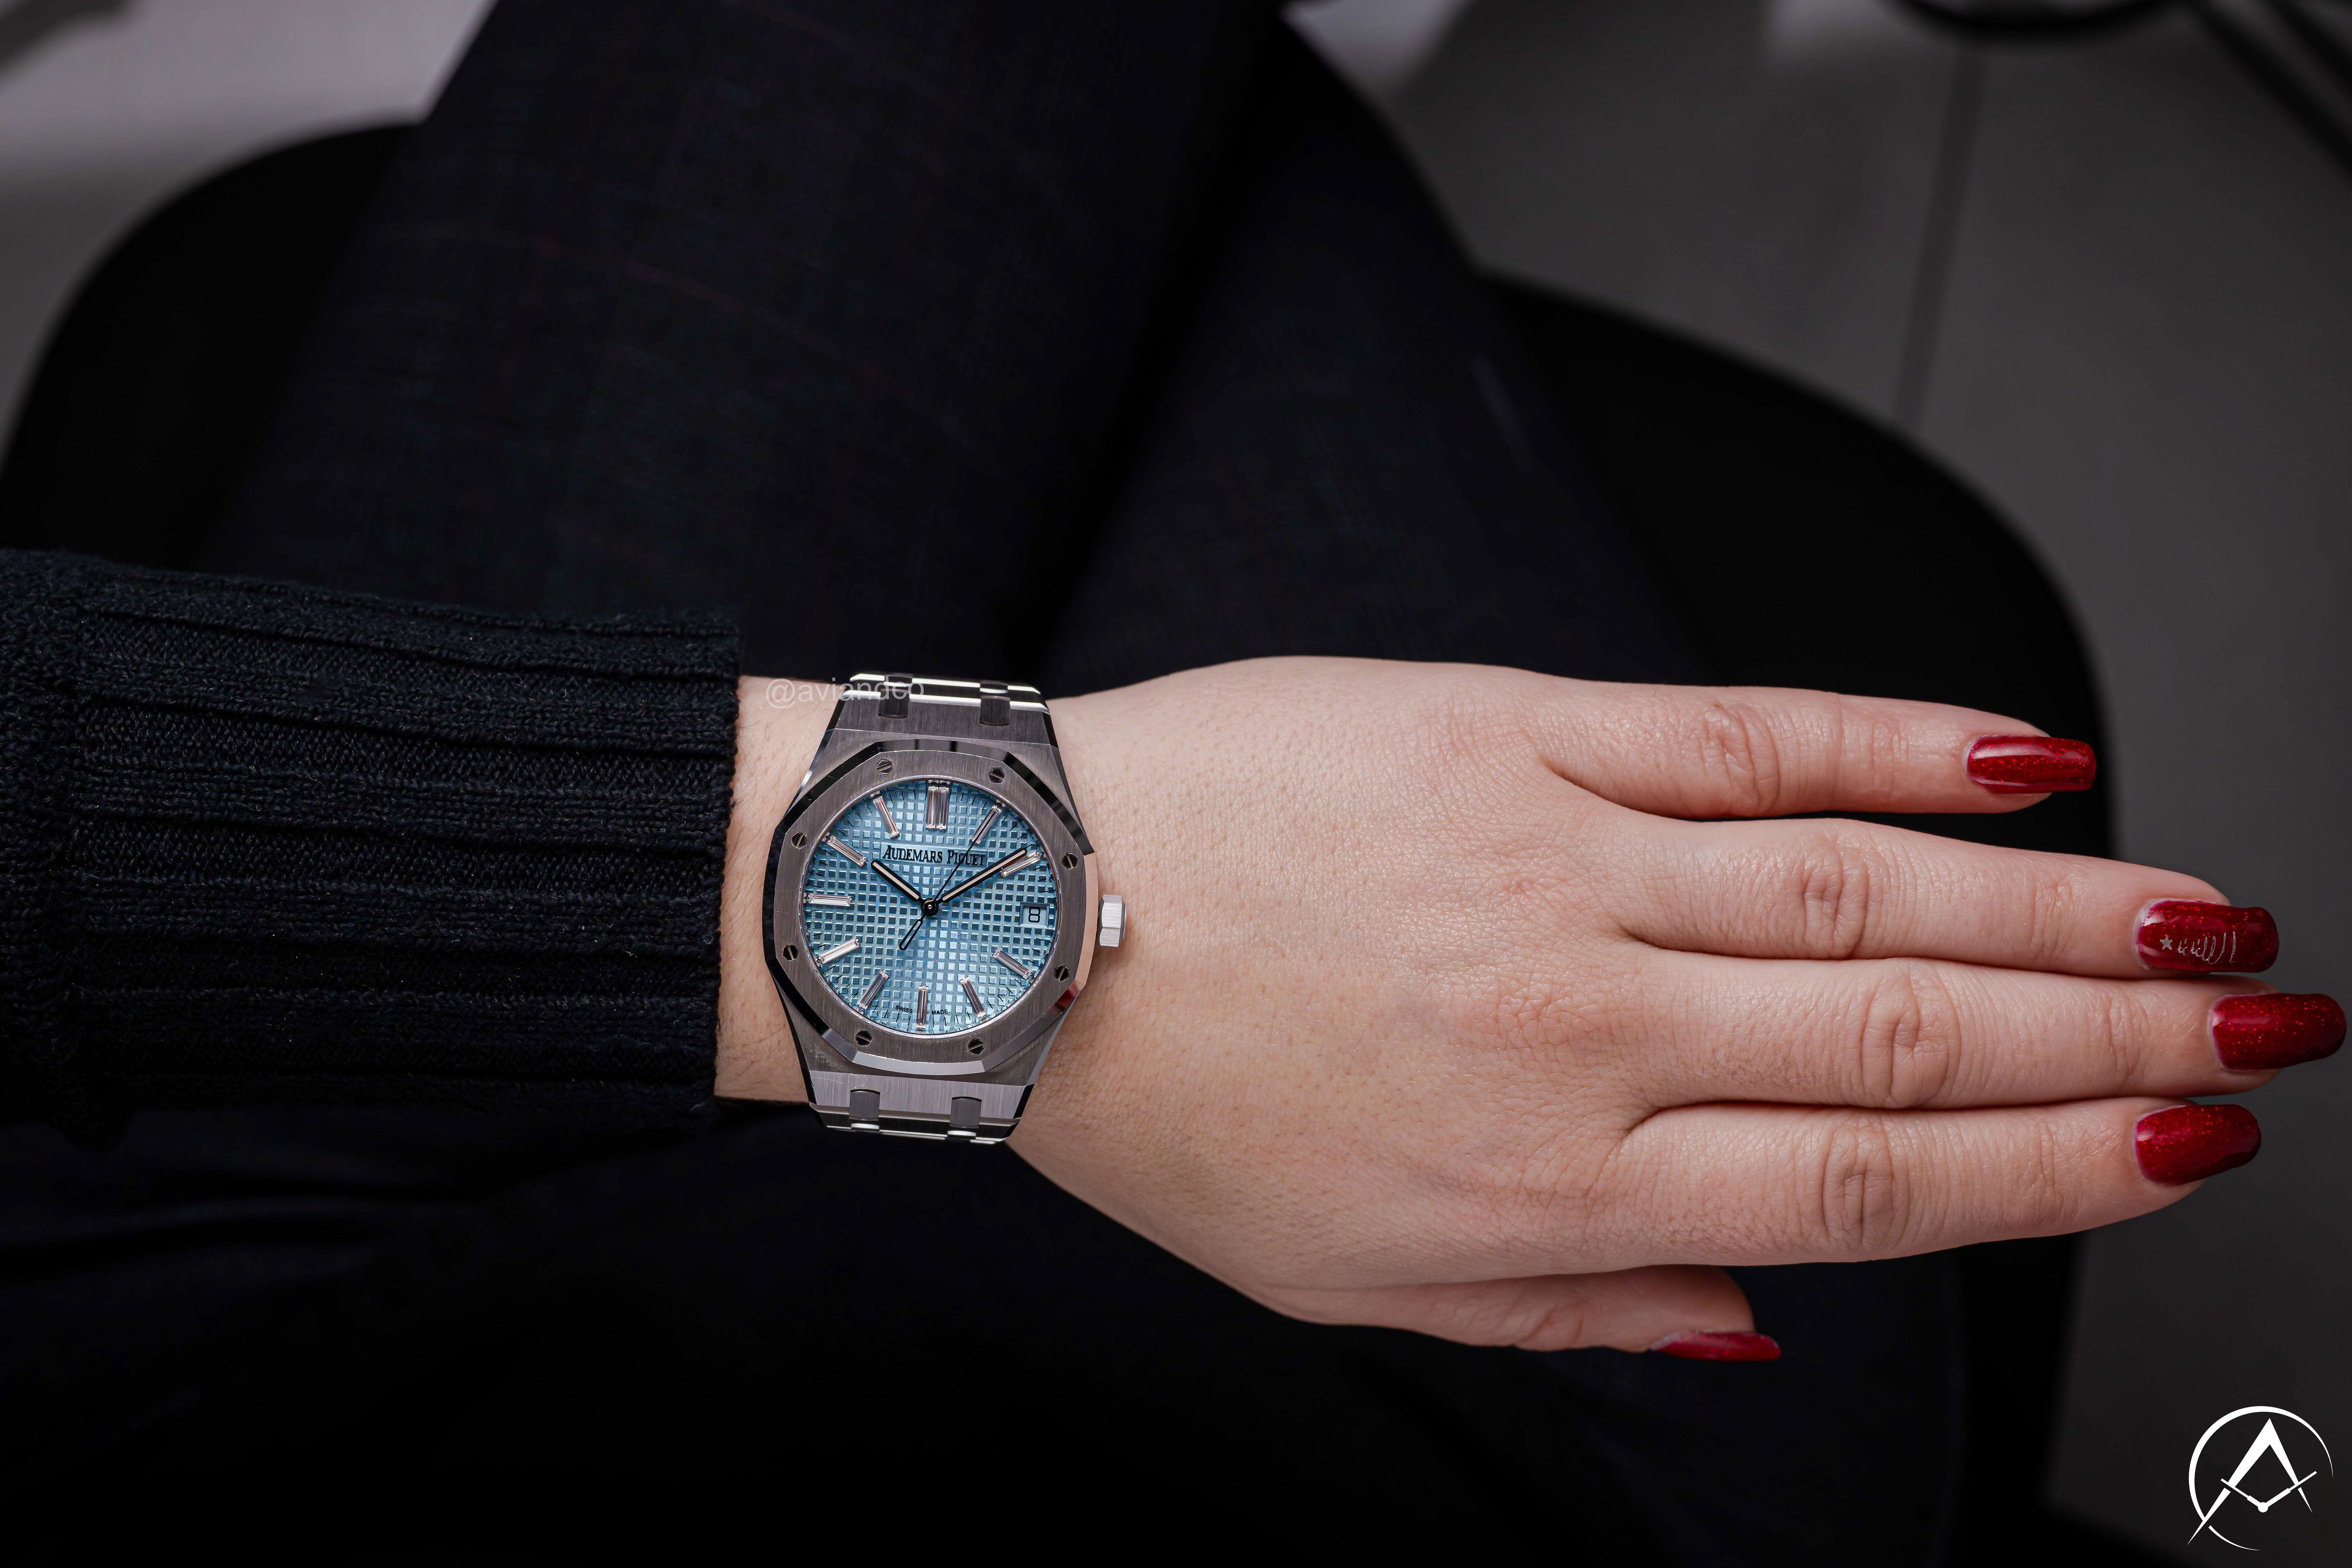 Stainless Steel Luxury Timepiece with Blue Dial, Index Hour Markers, and Date Function Displayed on a Woman’s Wrist.